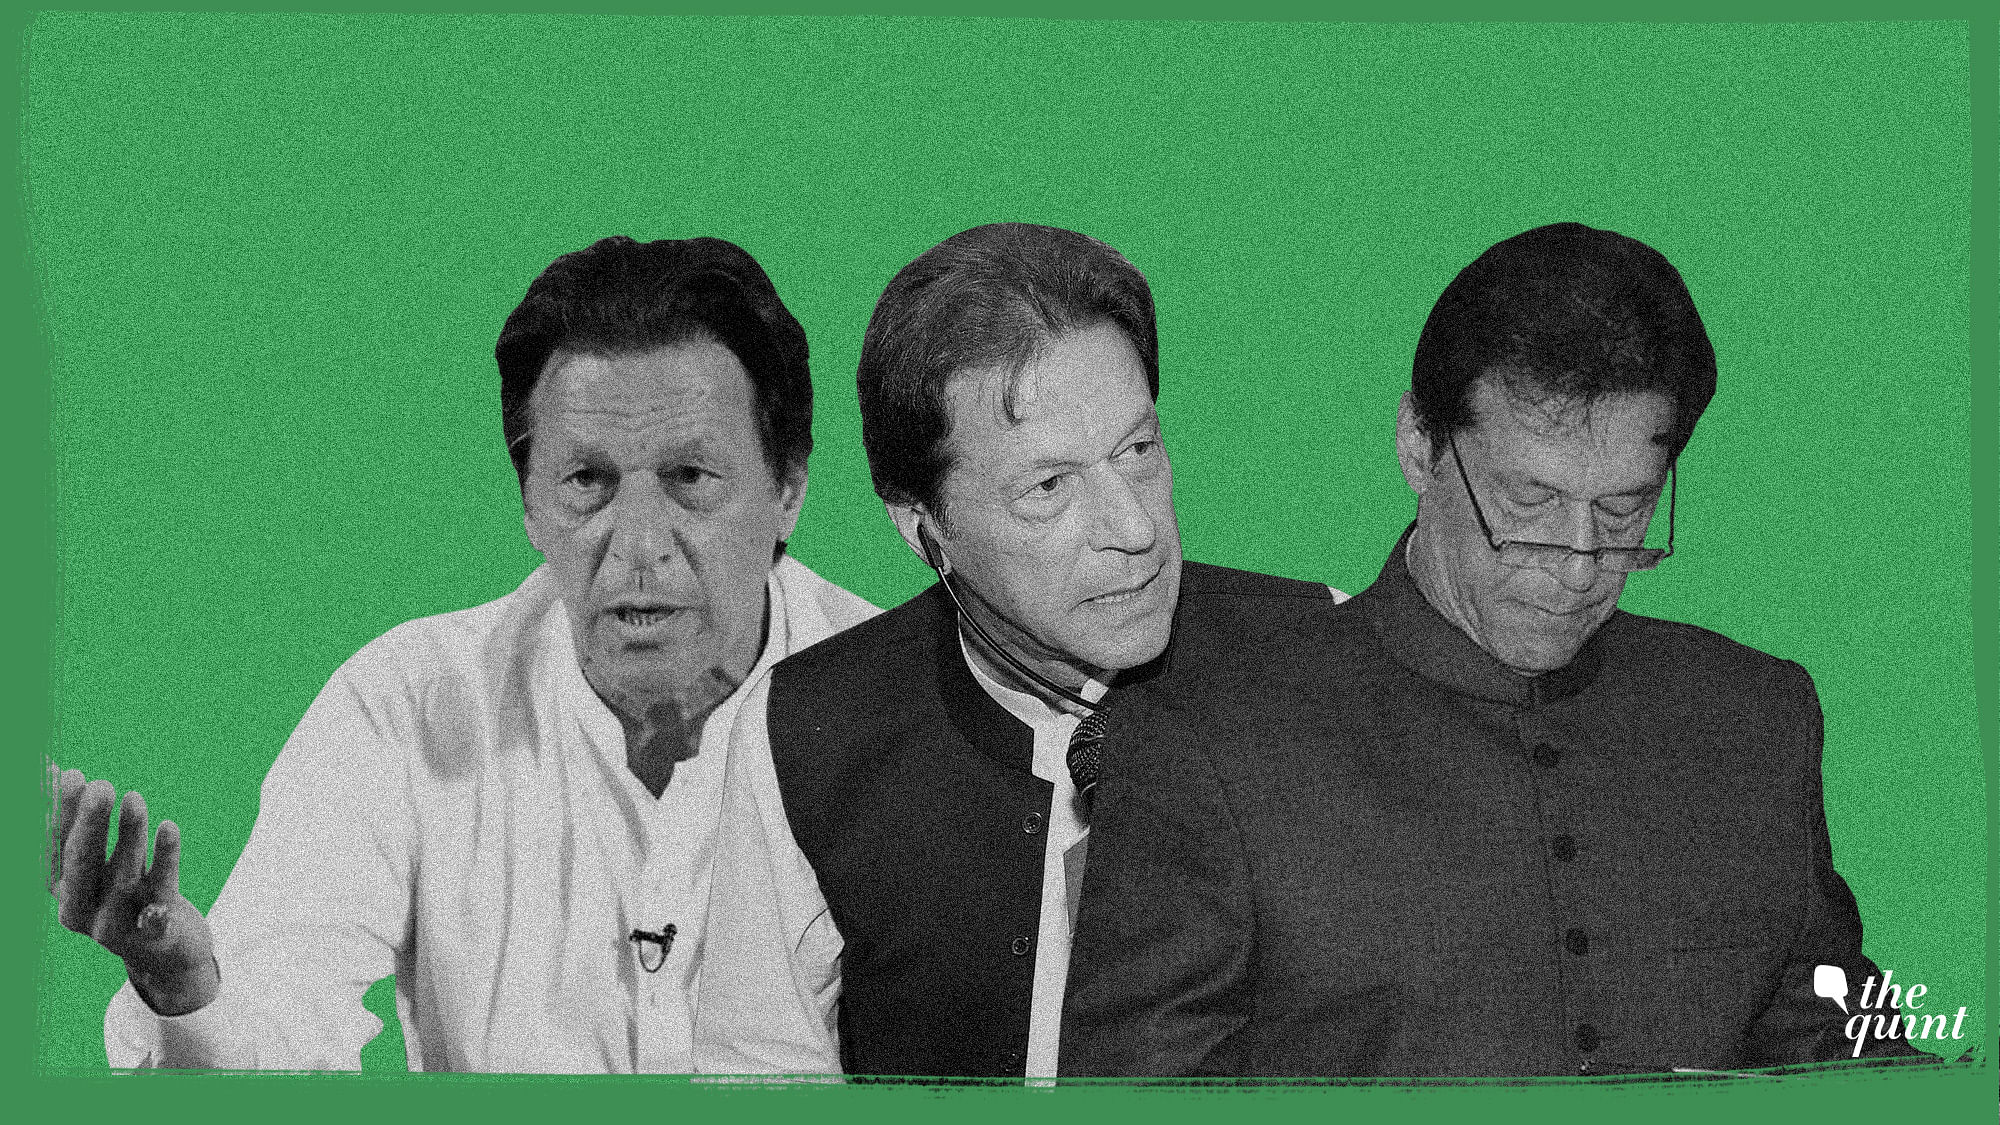 Prime Minister Imran Khan needs to let go of the attacks on his opponents and embrace the issues of the rest of the country.